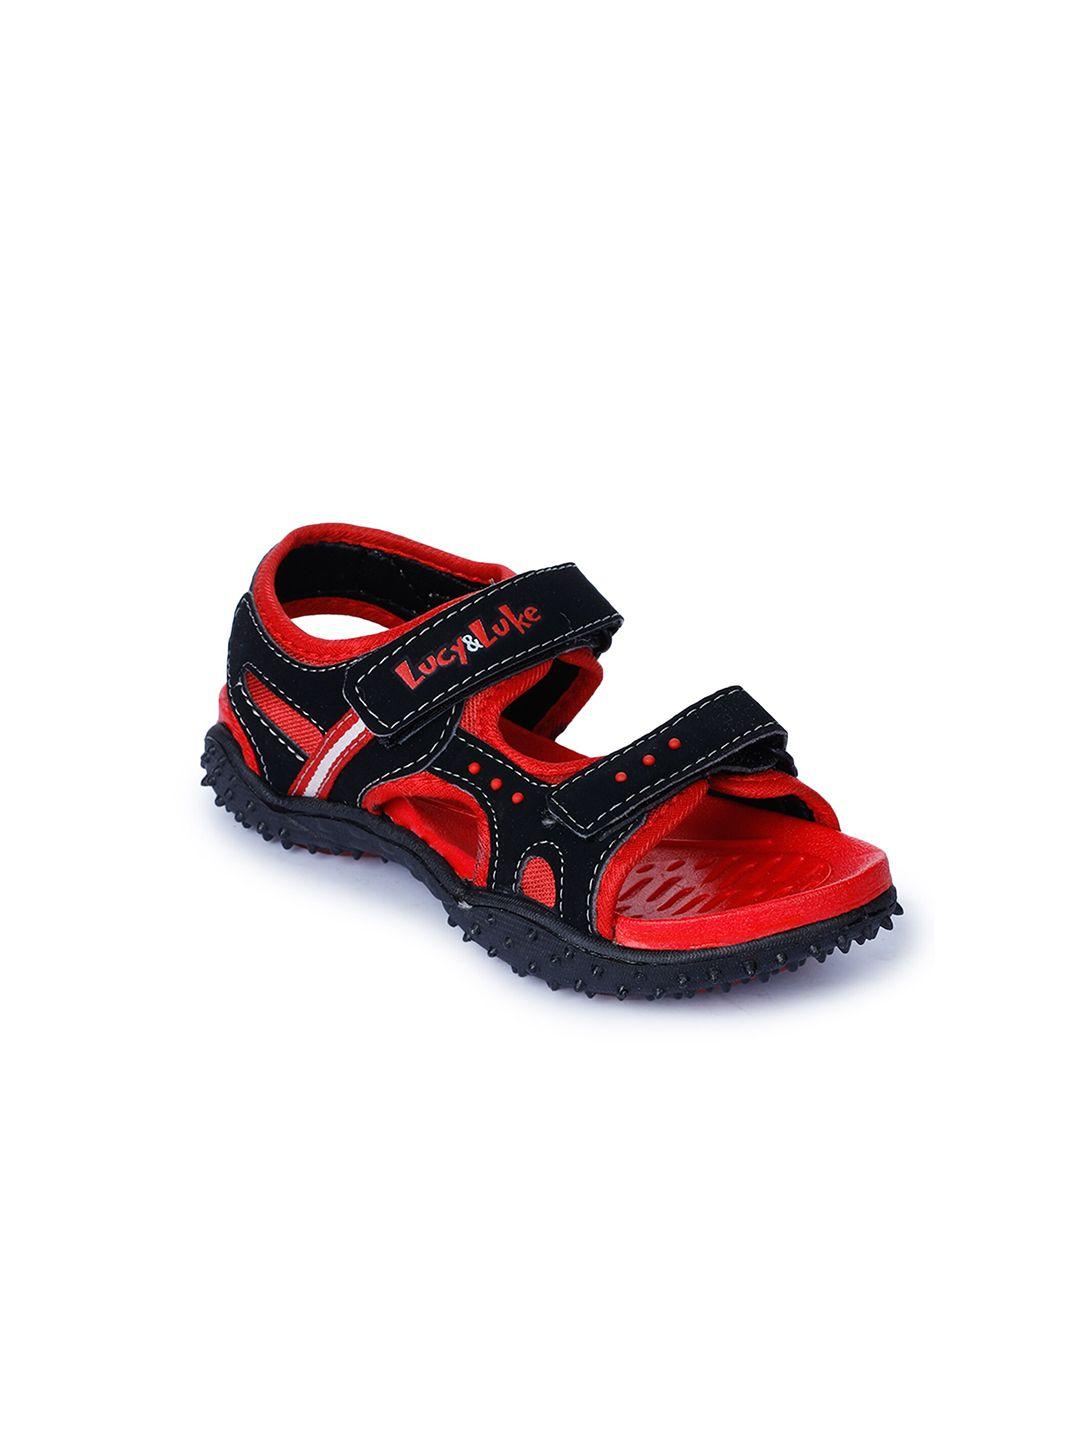 liberty kids red & black printed casual sports sandals